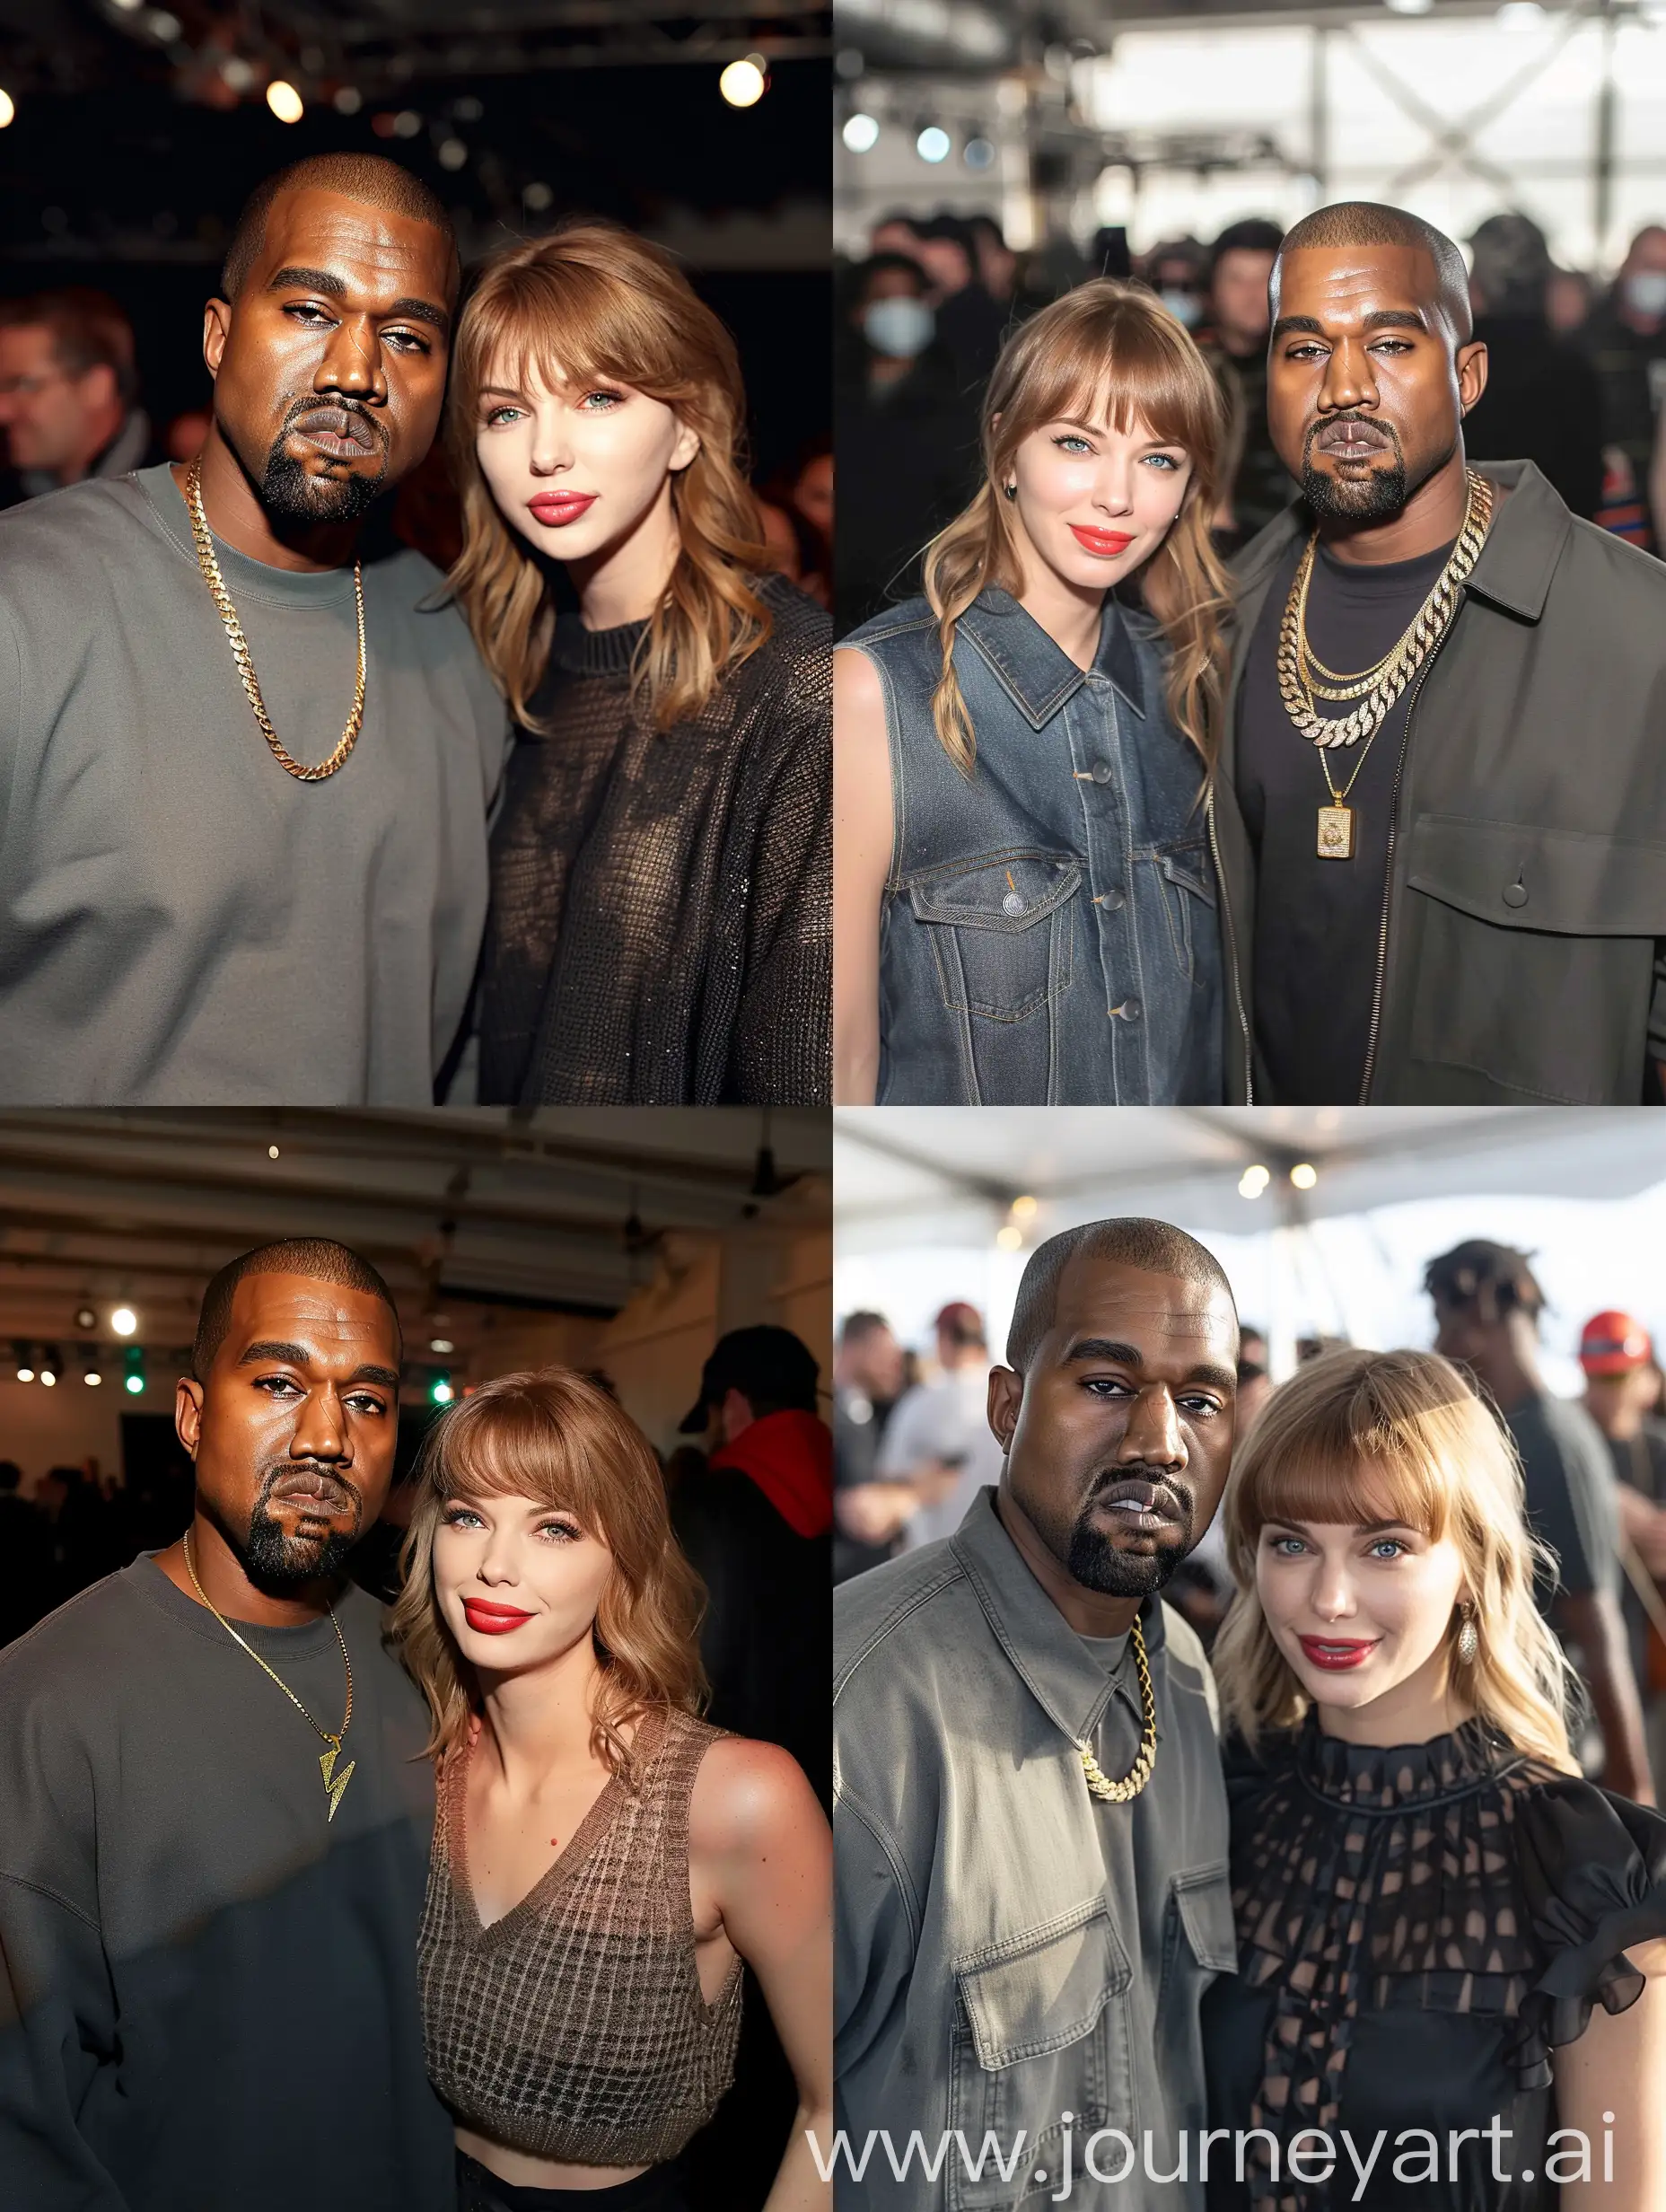 photo taken by a smartphone front camera of the rapper kanye west and taylor swift together. daylight